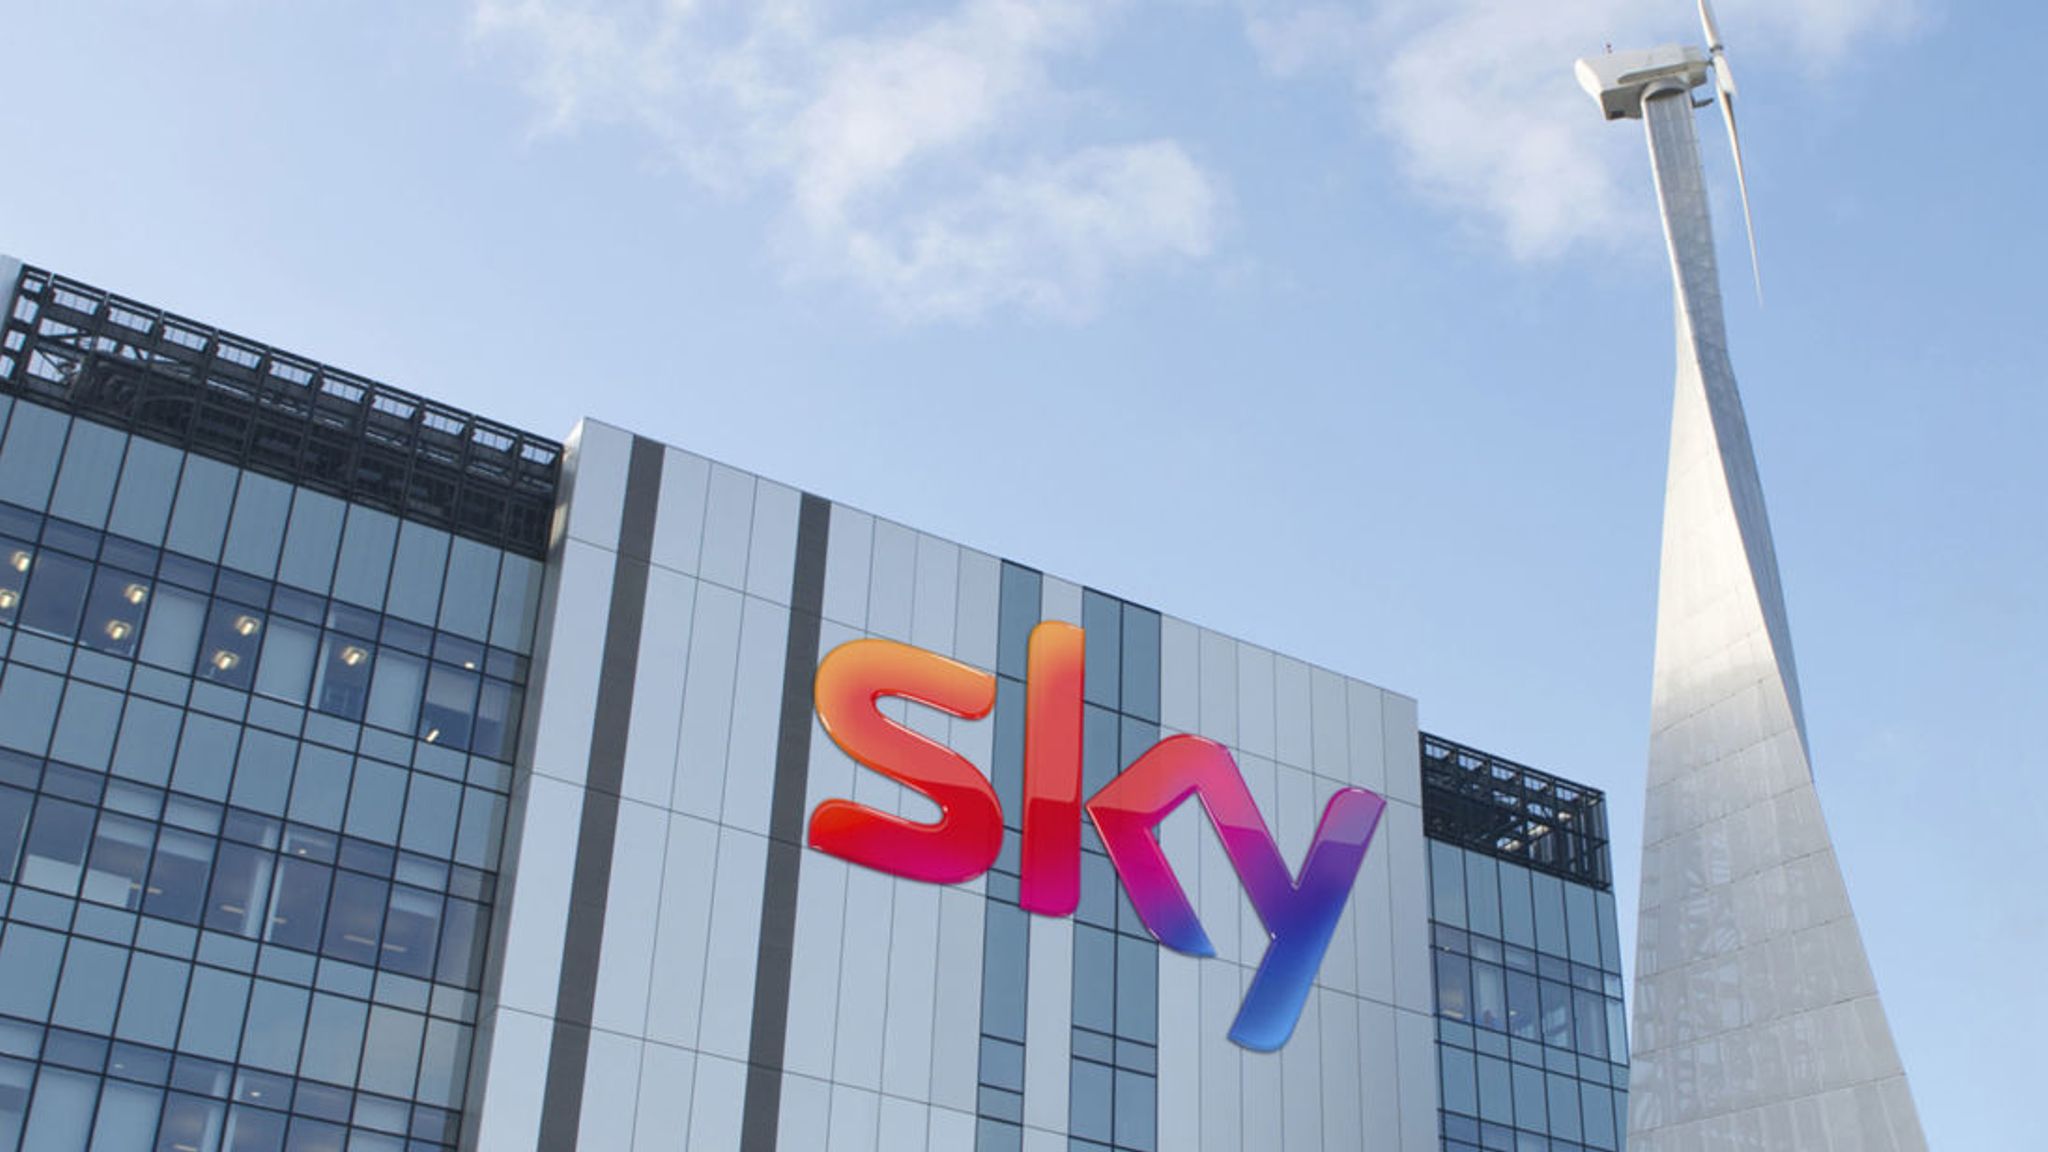 Comcast outbids Fox in auction for Sky valuing media company at £29.7bn | Business News | Sky News